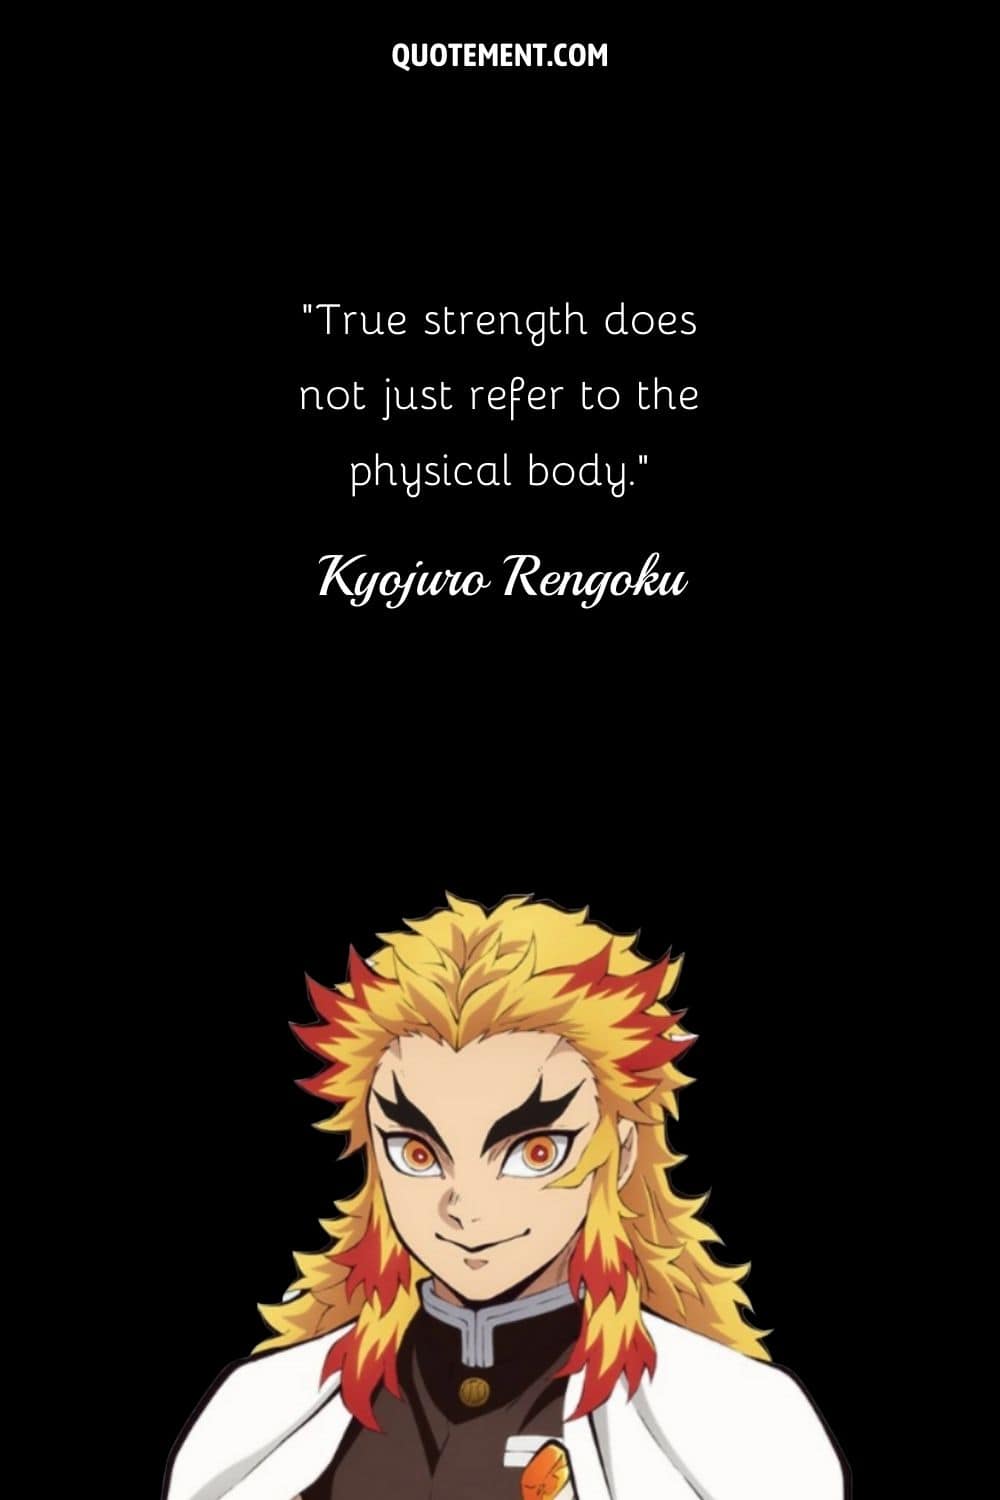 True strength does not just refer to the physical body.